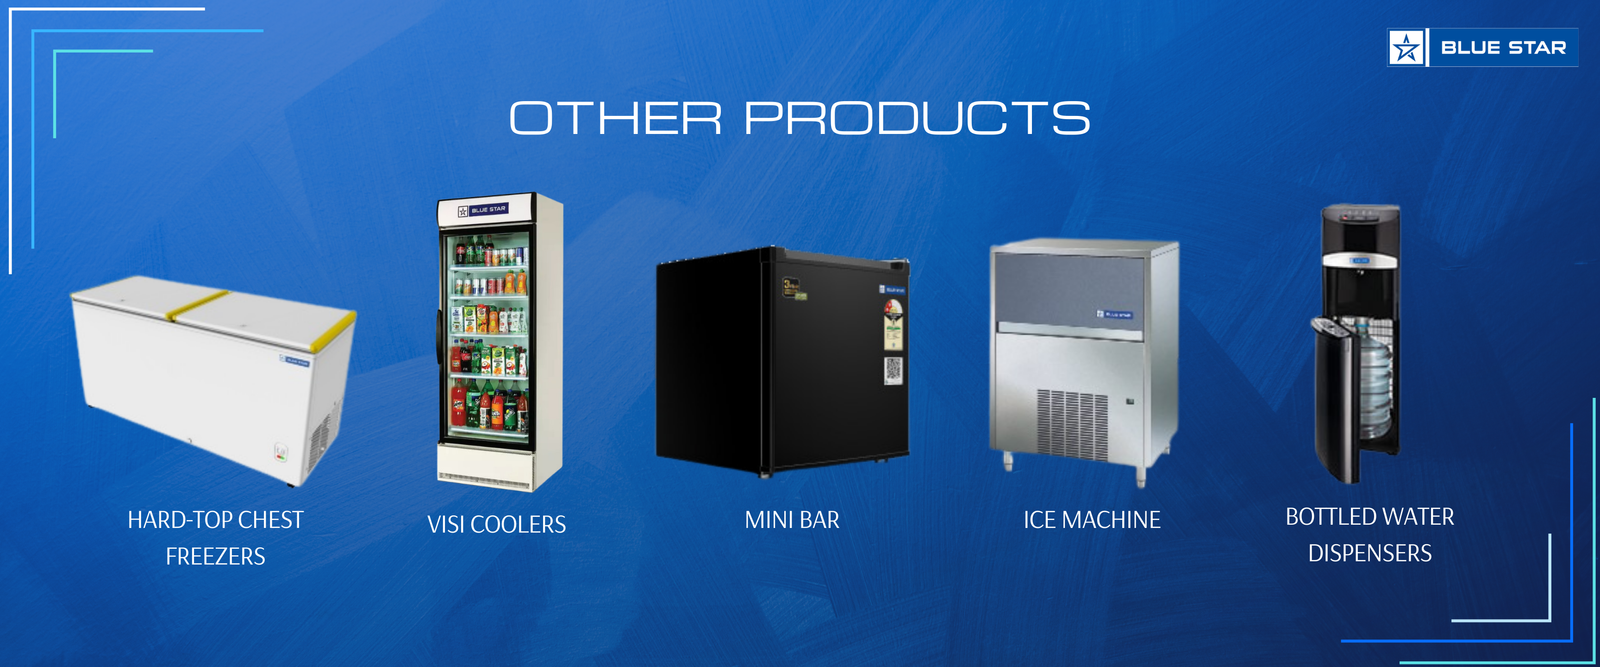 Commercial refrigeration systems